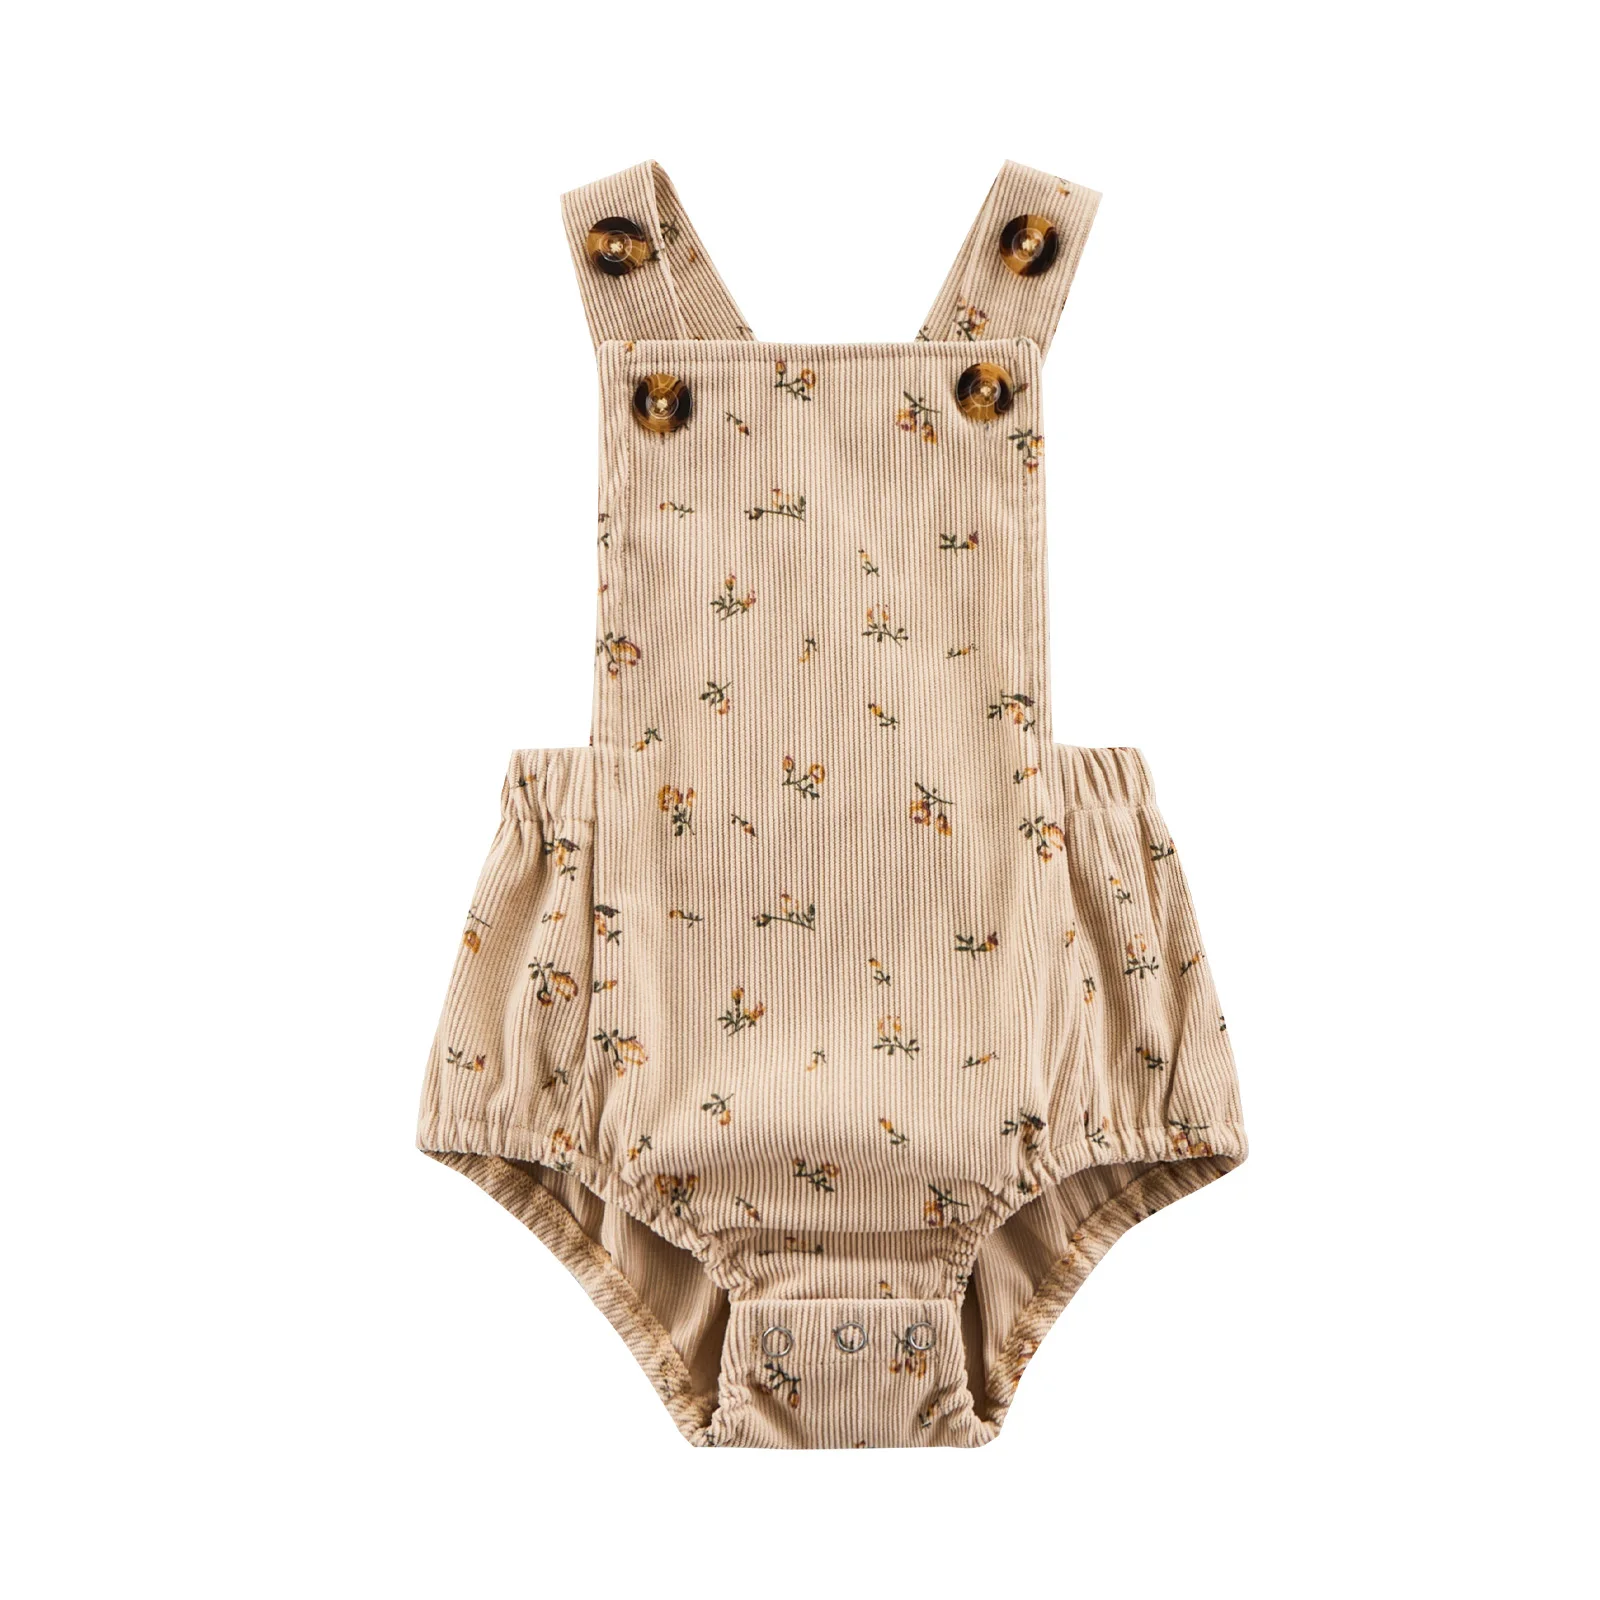 Lovely Baby Girls Printed Romper, Sleeveless Square Neck Buttoned Suspender Elastic Waist Jumpsuit Triangle Crotch Baby Bodysuits classic Baby Rompers